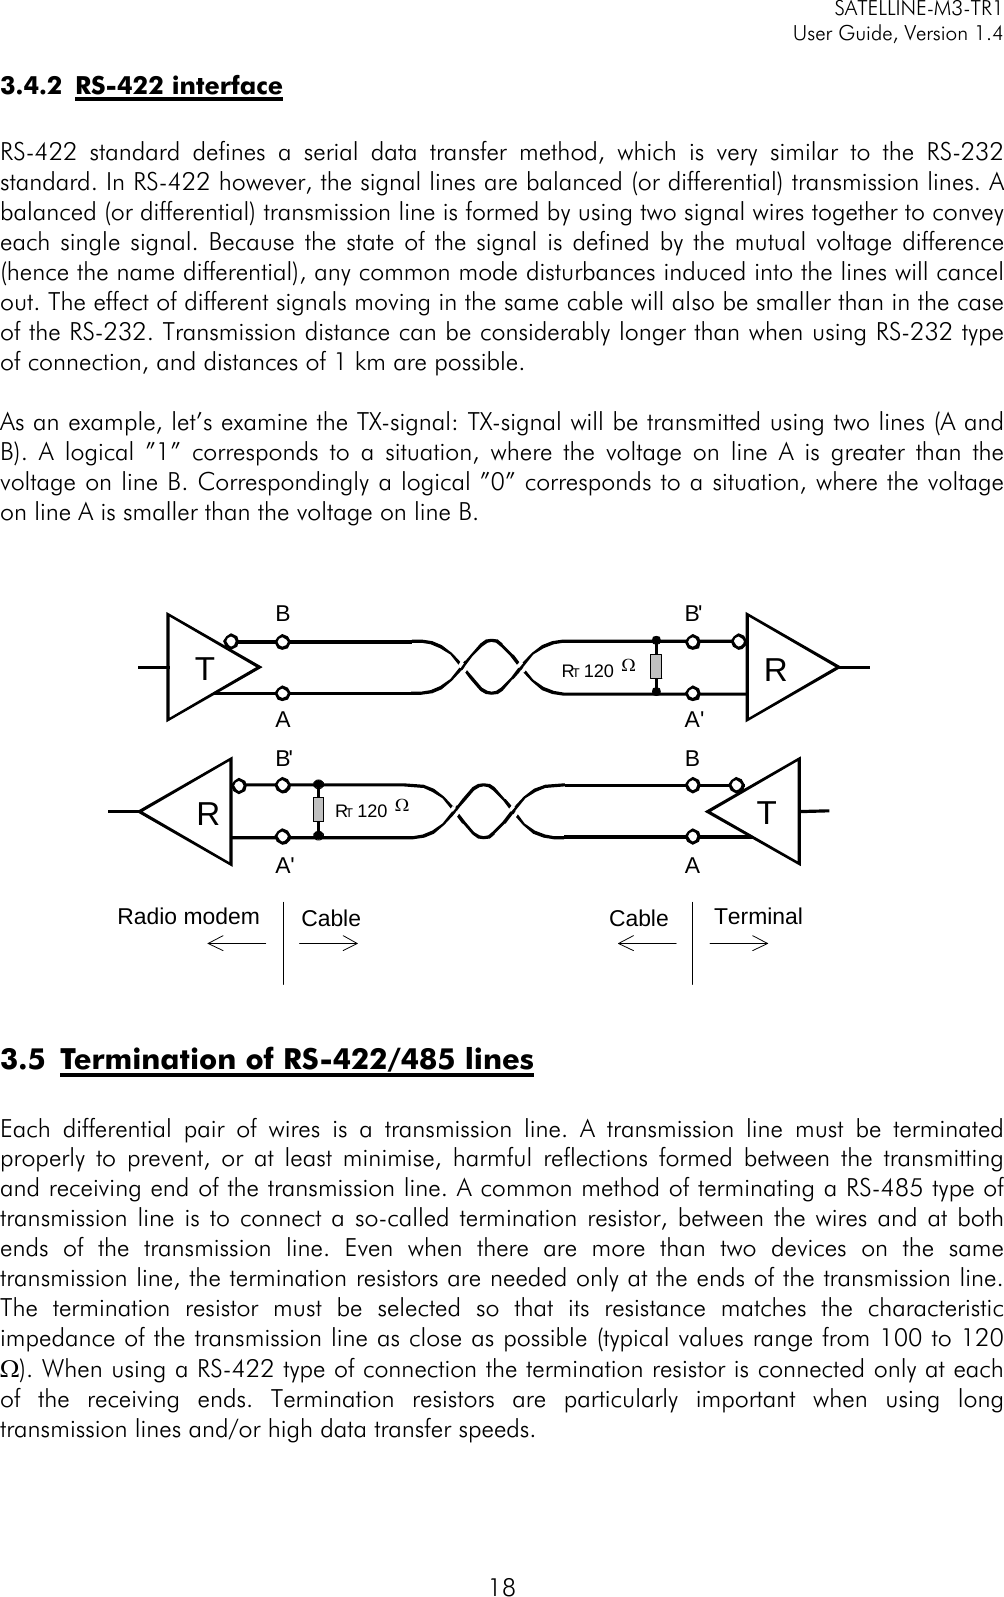   SATELLINE-M3-TR1     User Guide, Version 1.4   18 3.4.2 RS-422 interface  RS-422 standard defines a serial data transfer method, which is very similar to the RS-232 standard. In RS-422 however, the signal lines are balanced (or differential) transmission lines. A balanced (or differential) transmission line is formed by using two signal wires together to convey each single signal. Because the state of the signal is defined by the mutual voltage difference (hence the name differential), any common mode disturbances induced into the lines will cancel out. The effect of different signals moving in the same cable will also be smaller than in the case of the RS-232. Transmission distance can be considerably longer than when using RS-232 type of connection, and distances of 1 km are possible.   As an example, let’s examine the TX-signal: TX-signal will be transmitted using two lines (A and B). A logical ”1” corresponds to a situation, where the voltage on line A is greater than the voltage on line B. Correspondingly a logical ”0” corresponds to a situation, where the voltage on line A is smaller than the voltage on line B.     3.5 Termination of RS-422/485 lines  Each differential pair of wires is a transmission line. A transmission line must be terminated properly to prevent, or at least minimise, harmful reflections formed between the transmitting and receiving end of the transmission line. A common method of terminating a RS-485 type of transmission line is to connect a so-called termination resistor, between the wires and at both ends of the transmission line. Even when there are more than two devices on the same transmission line, the termination resistors are needed only at the ends of the transmission line. The termination resistor must be selected so that its resistance matches the characteristic impedance of the transmission line as close as possible (typical values range from 100 to 120 Ω). When using a RS-422 type of connection the termination resistor is connected only at each of the receiving ends. Termination resistors are particularly important when using long transmission lines and/or high data transfer speeds.  RT  120 ΩRTRT  120 ΩRTBB&apos;AA&apos;B&apos; BA&apos; ARadio modem Cable TerminalCable